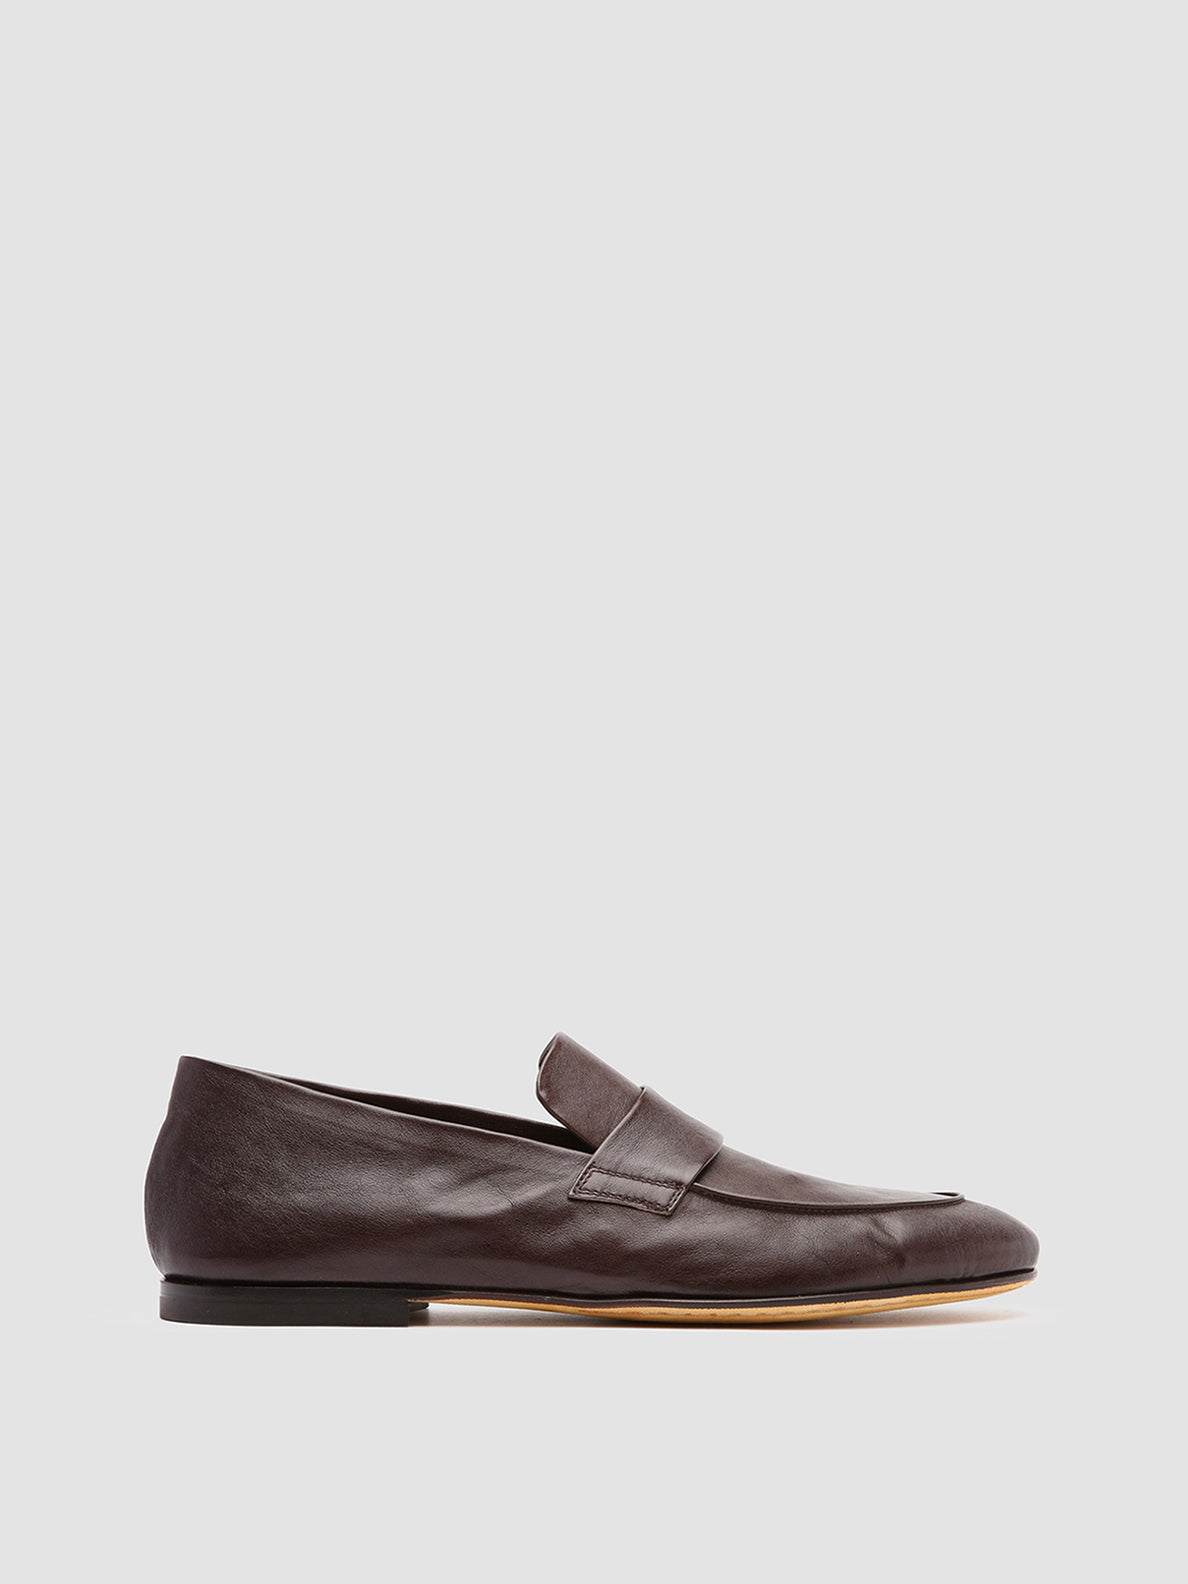 Men's Brown Leather Penny Loafers: AIRTO 001 – Officine Creative EU